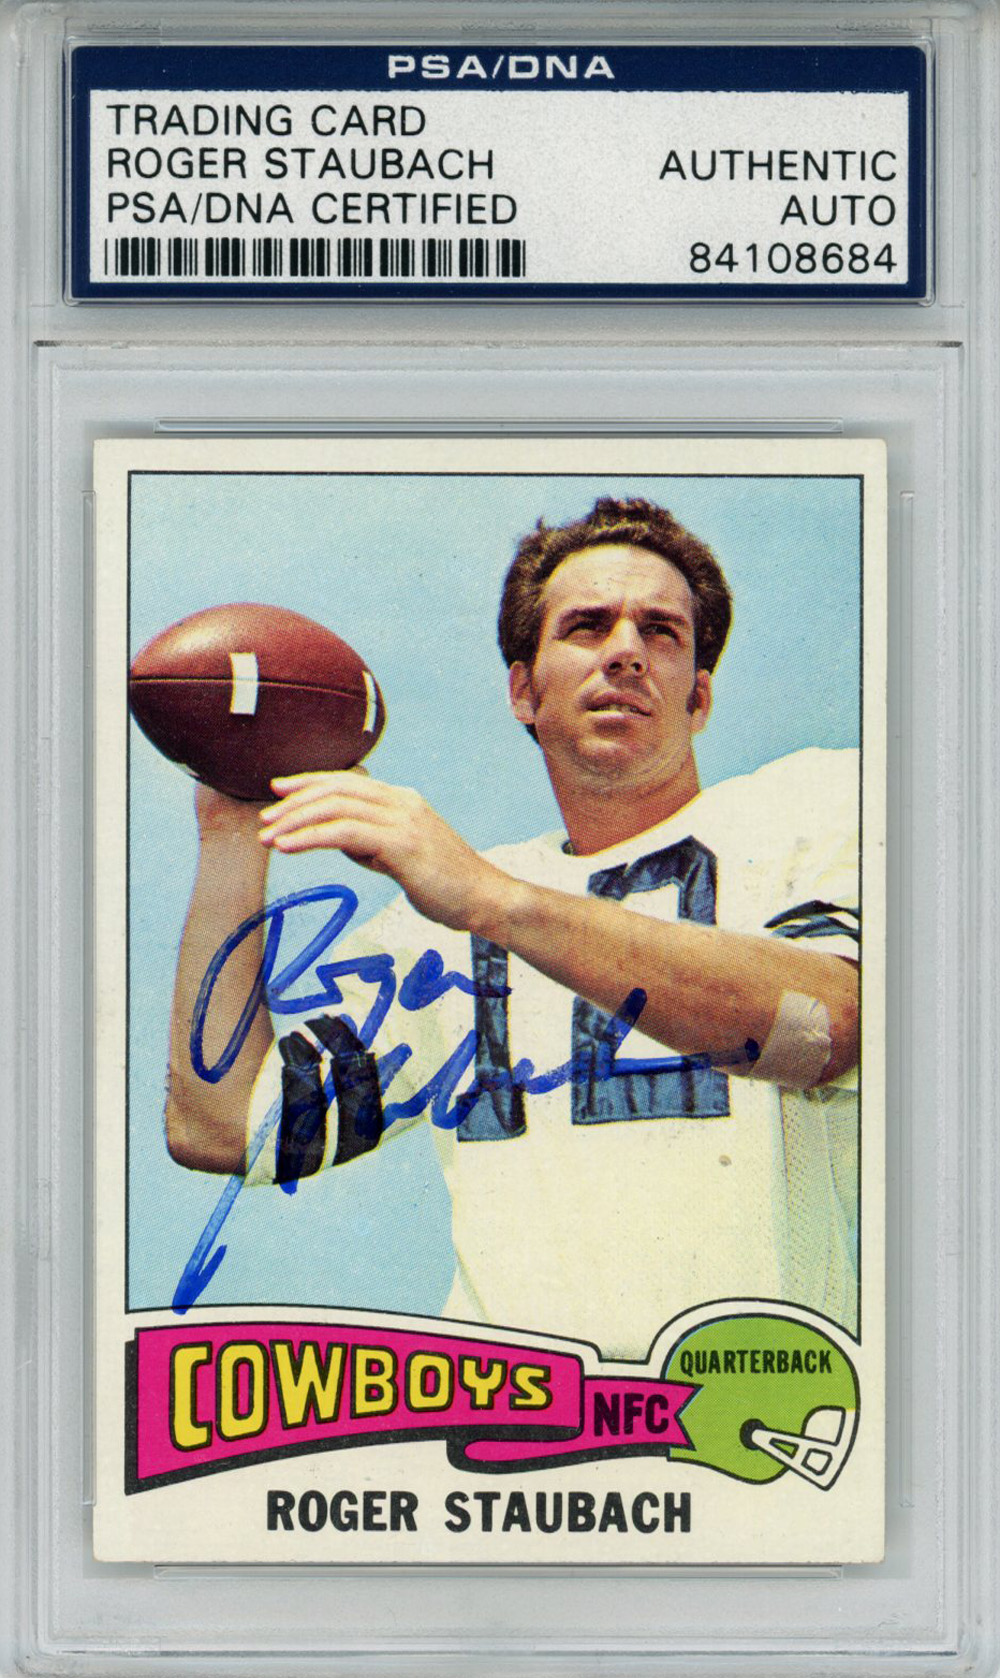 Roger Staubach Autographed 1975 Topps #145 Trading Card PSA Slab